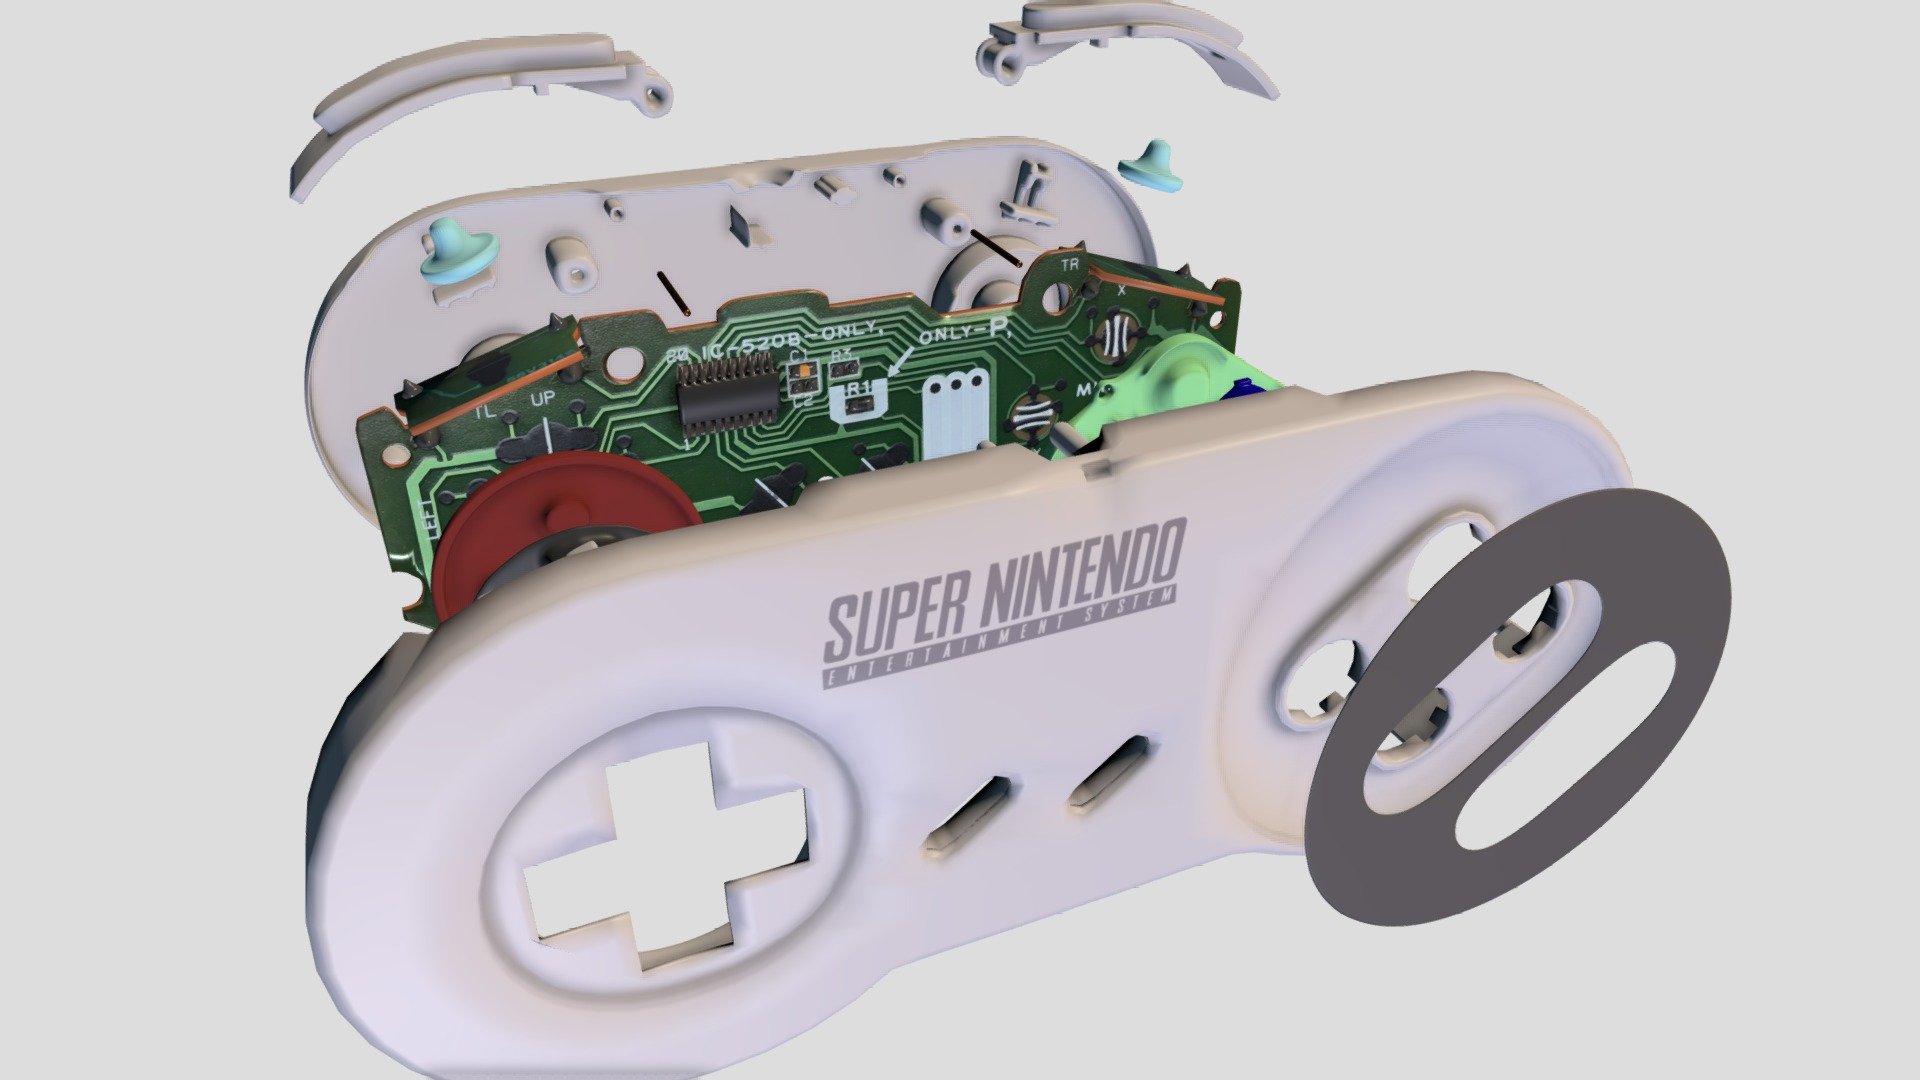 Supernintendo controller, complete with internal parts such as rubbers, buttons, solder, etc. Available for sale, japanese, american and european variants available also. I got my european controller apart and modeled each part separately, it took a long time, hope you like it! - SuperNintendo Controller complete with internals - 3D model by guelmi3D 3d model